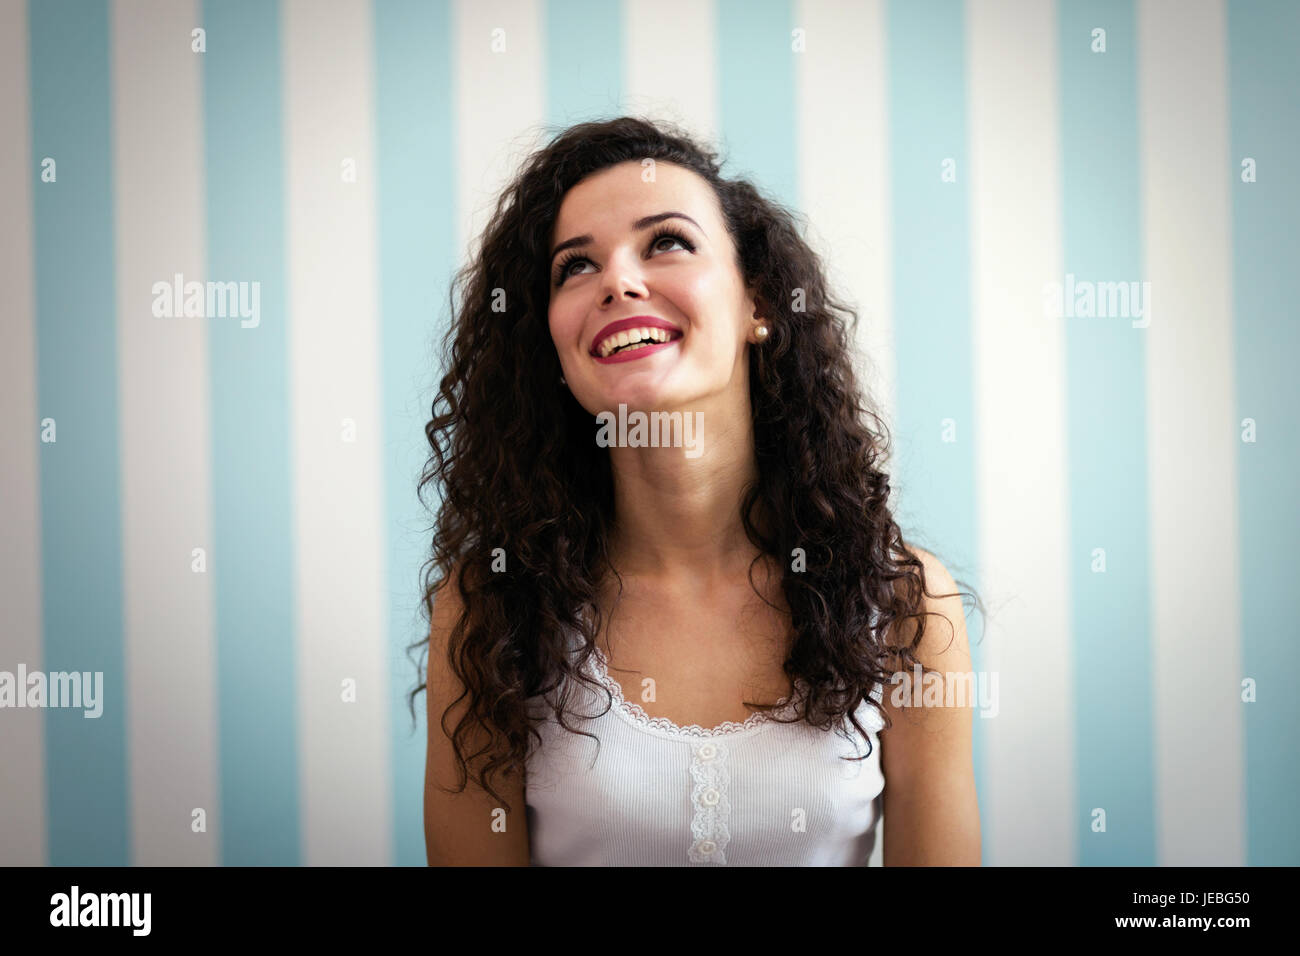 Portrait of young beautiful woman with curly hair Stock Photo